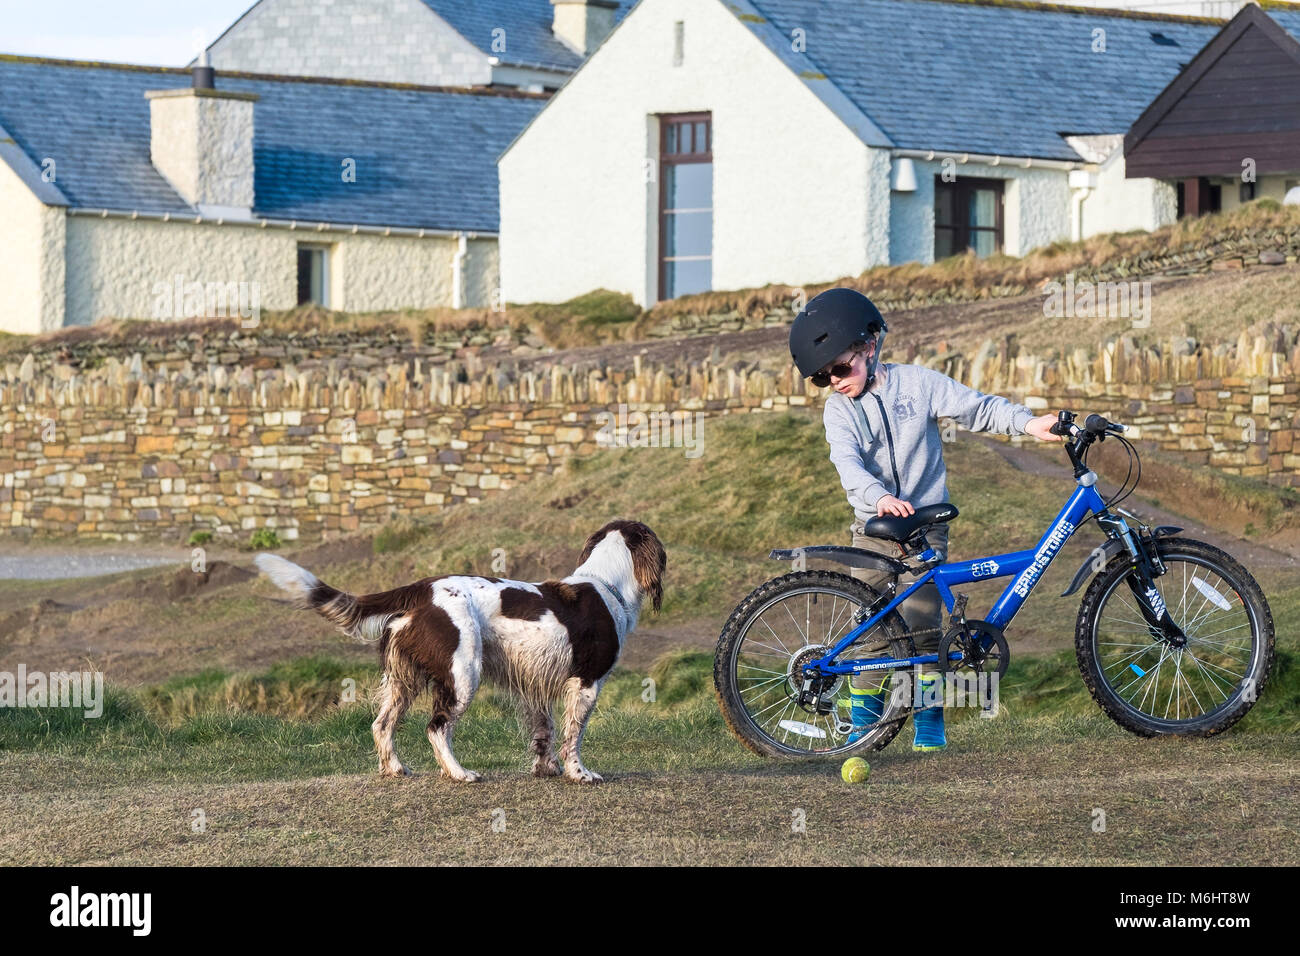 A young boy with his bike and his dog. Stock Photo